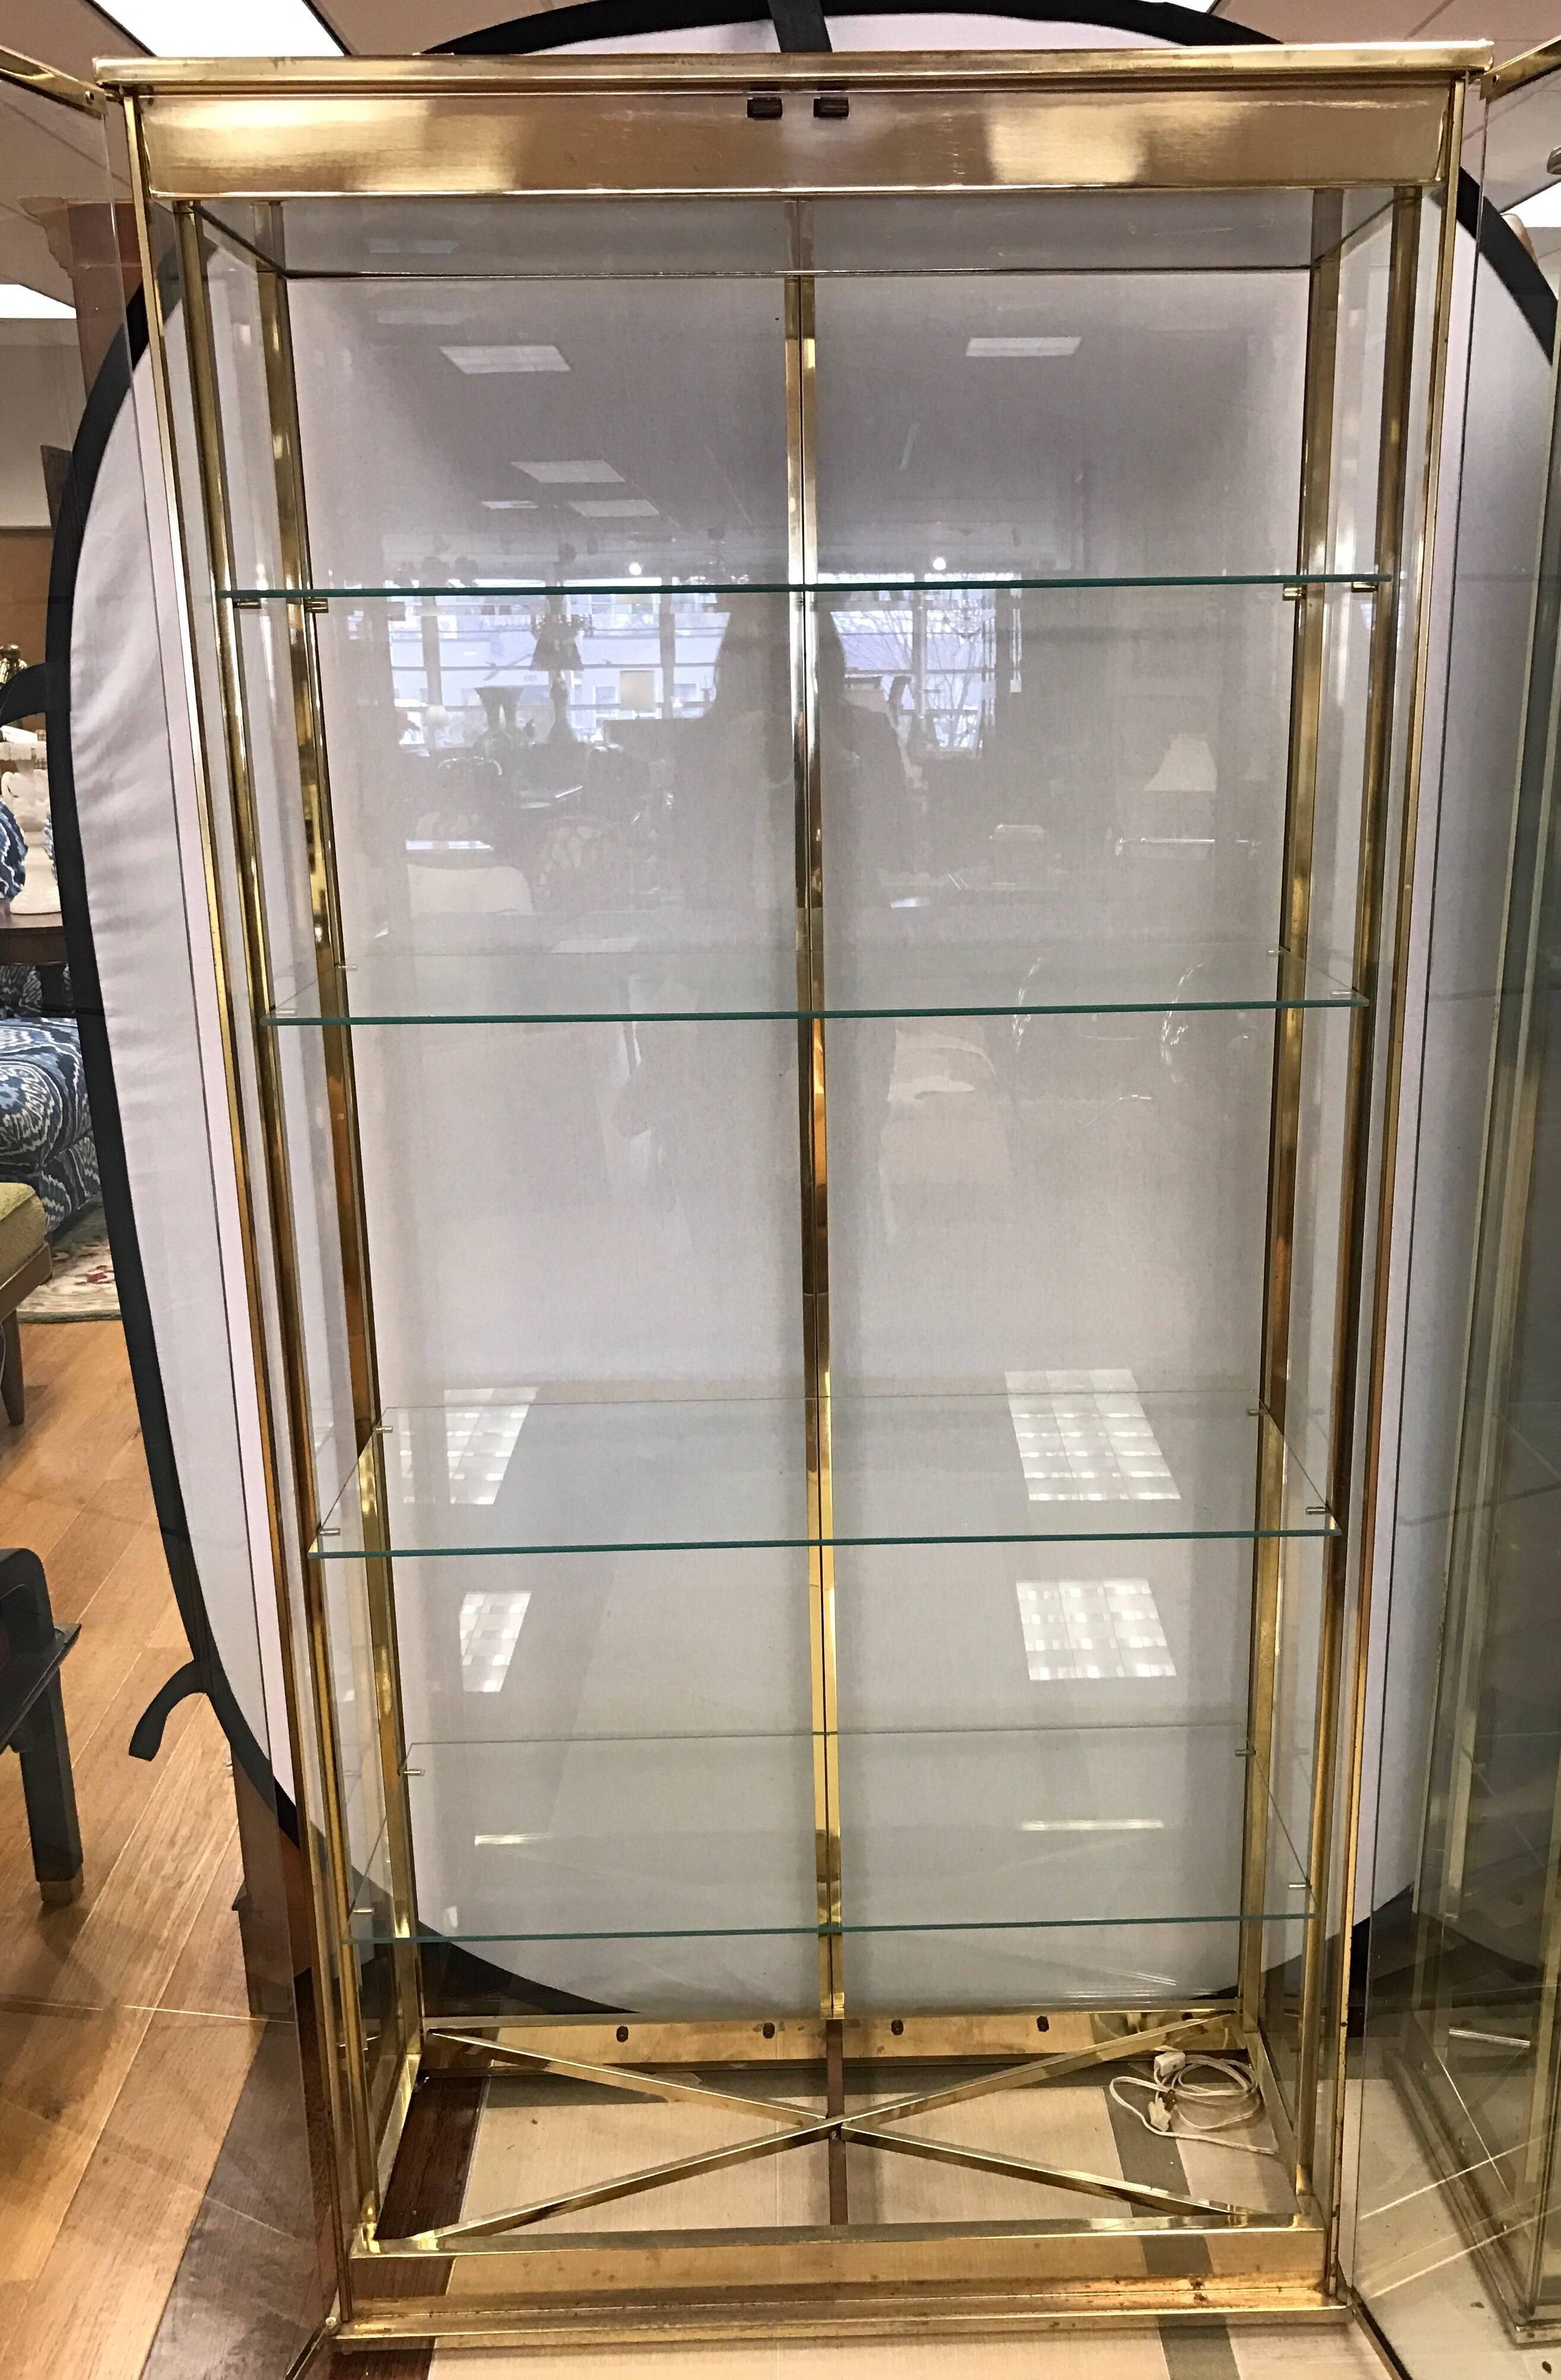 Pair of midcentury brass and glass Mastercraft vitrines with four glass shelves. These cabinets are electrified and are lit from above.